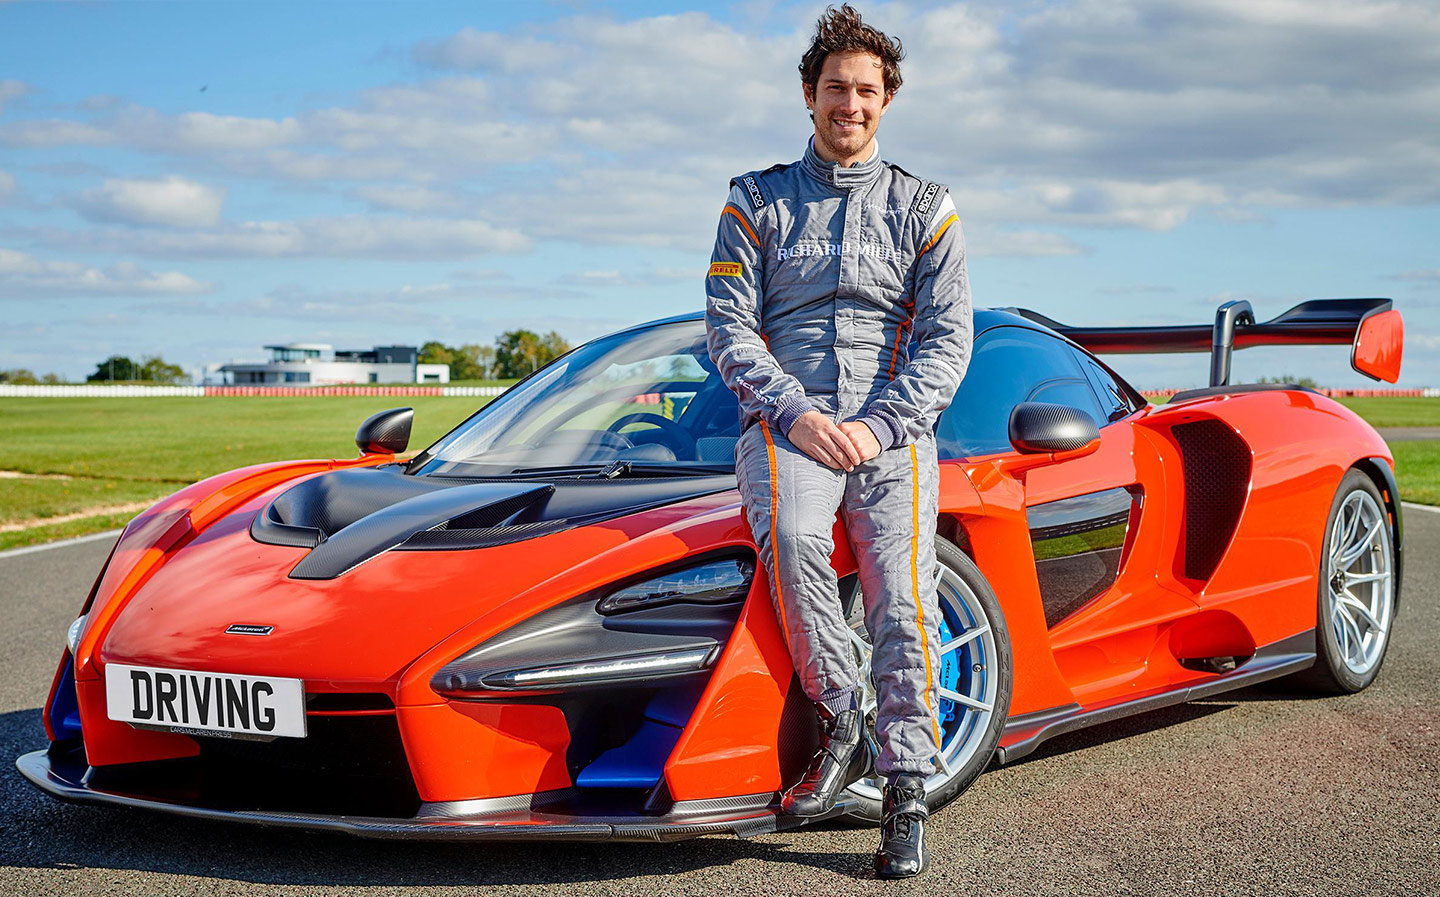 The nephew of the great Formula One champion chased Uncle Ayrton in his go-kart. Bruno Senna interview by Jeremy Taylor for Sunday Times Driving.